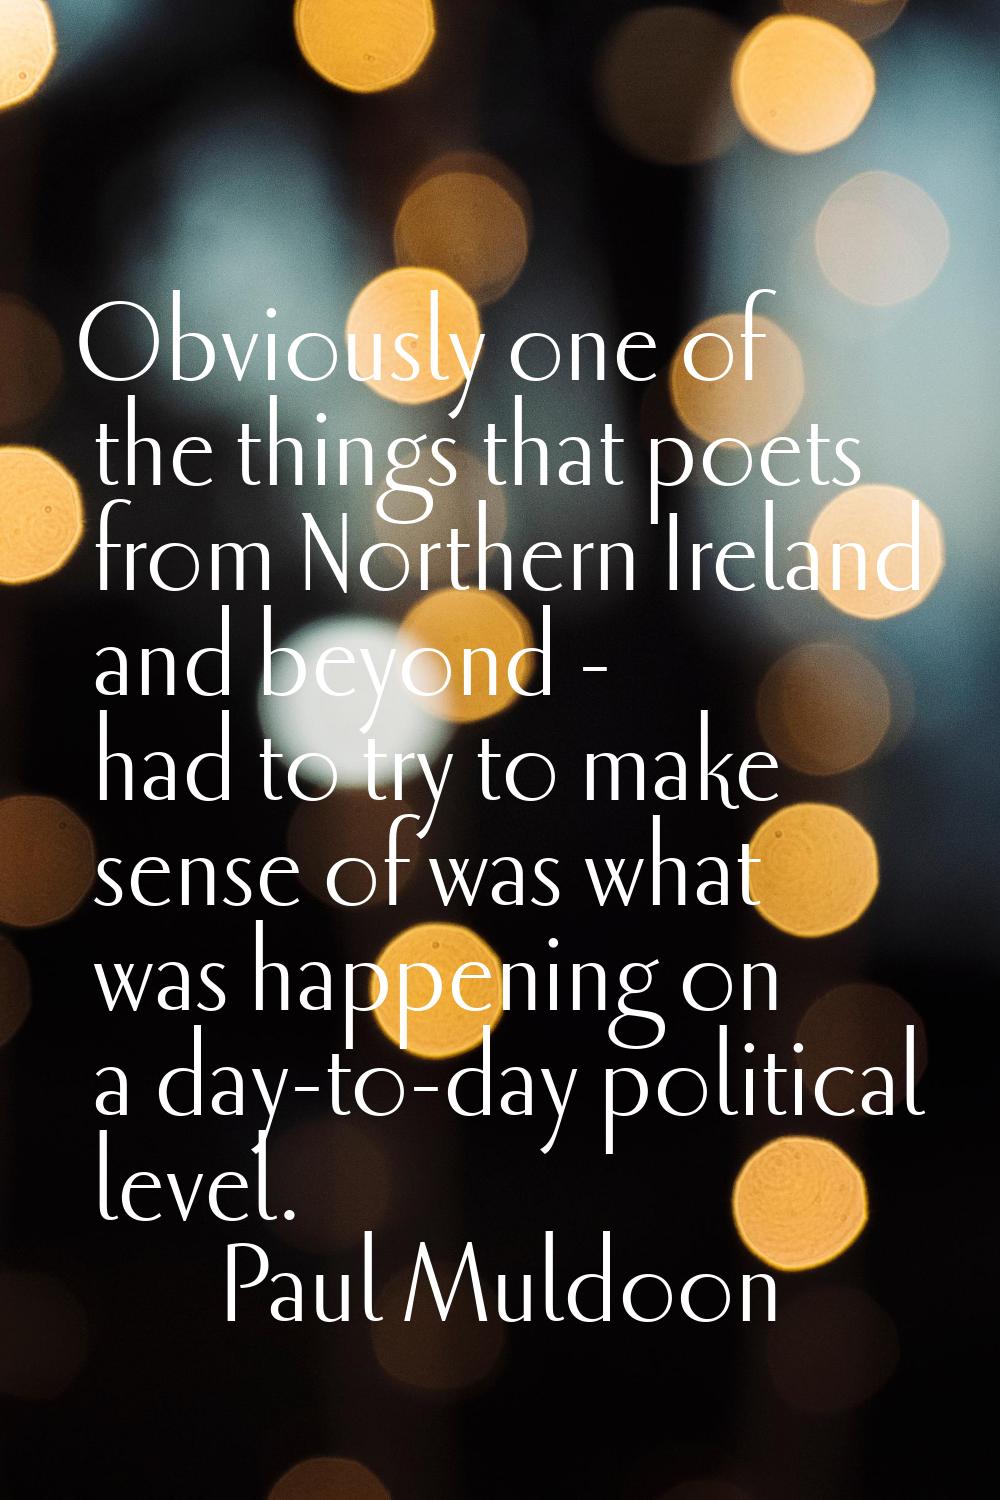 Obviously one of the things that poets from Northern Ireland and beyond - had to try to make sense 